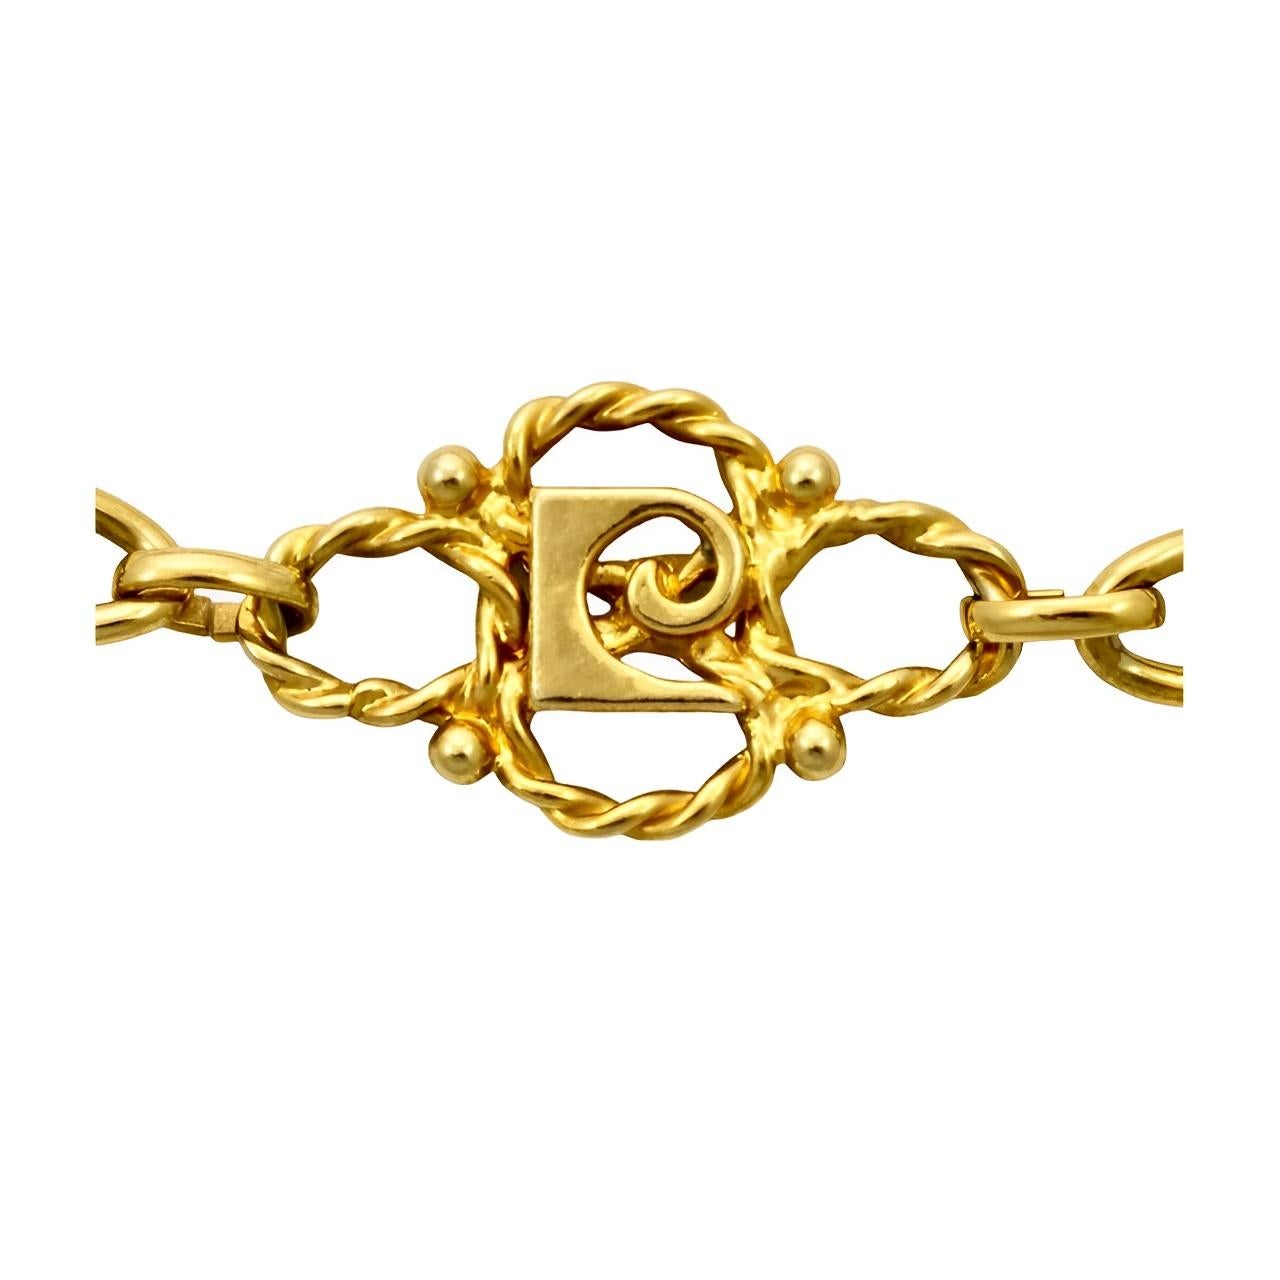 Pierre Cardin Monogram Gold Plated Chain Link Belt circa 1970s In Good Condition For Sale In London, GB